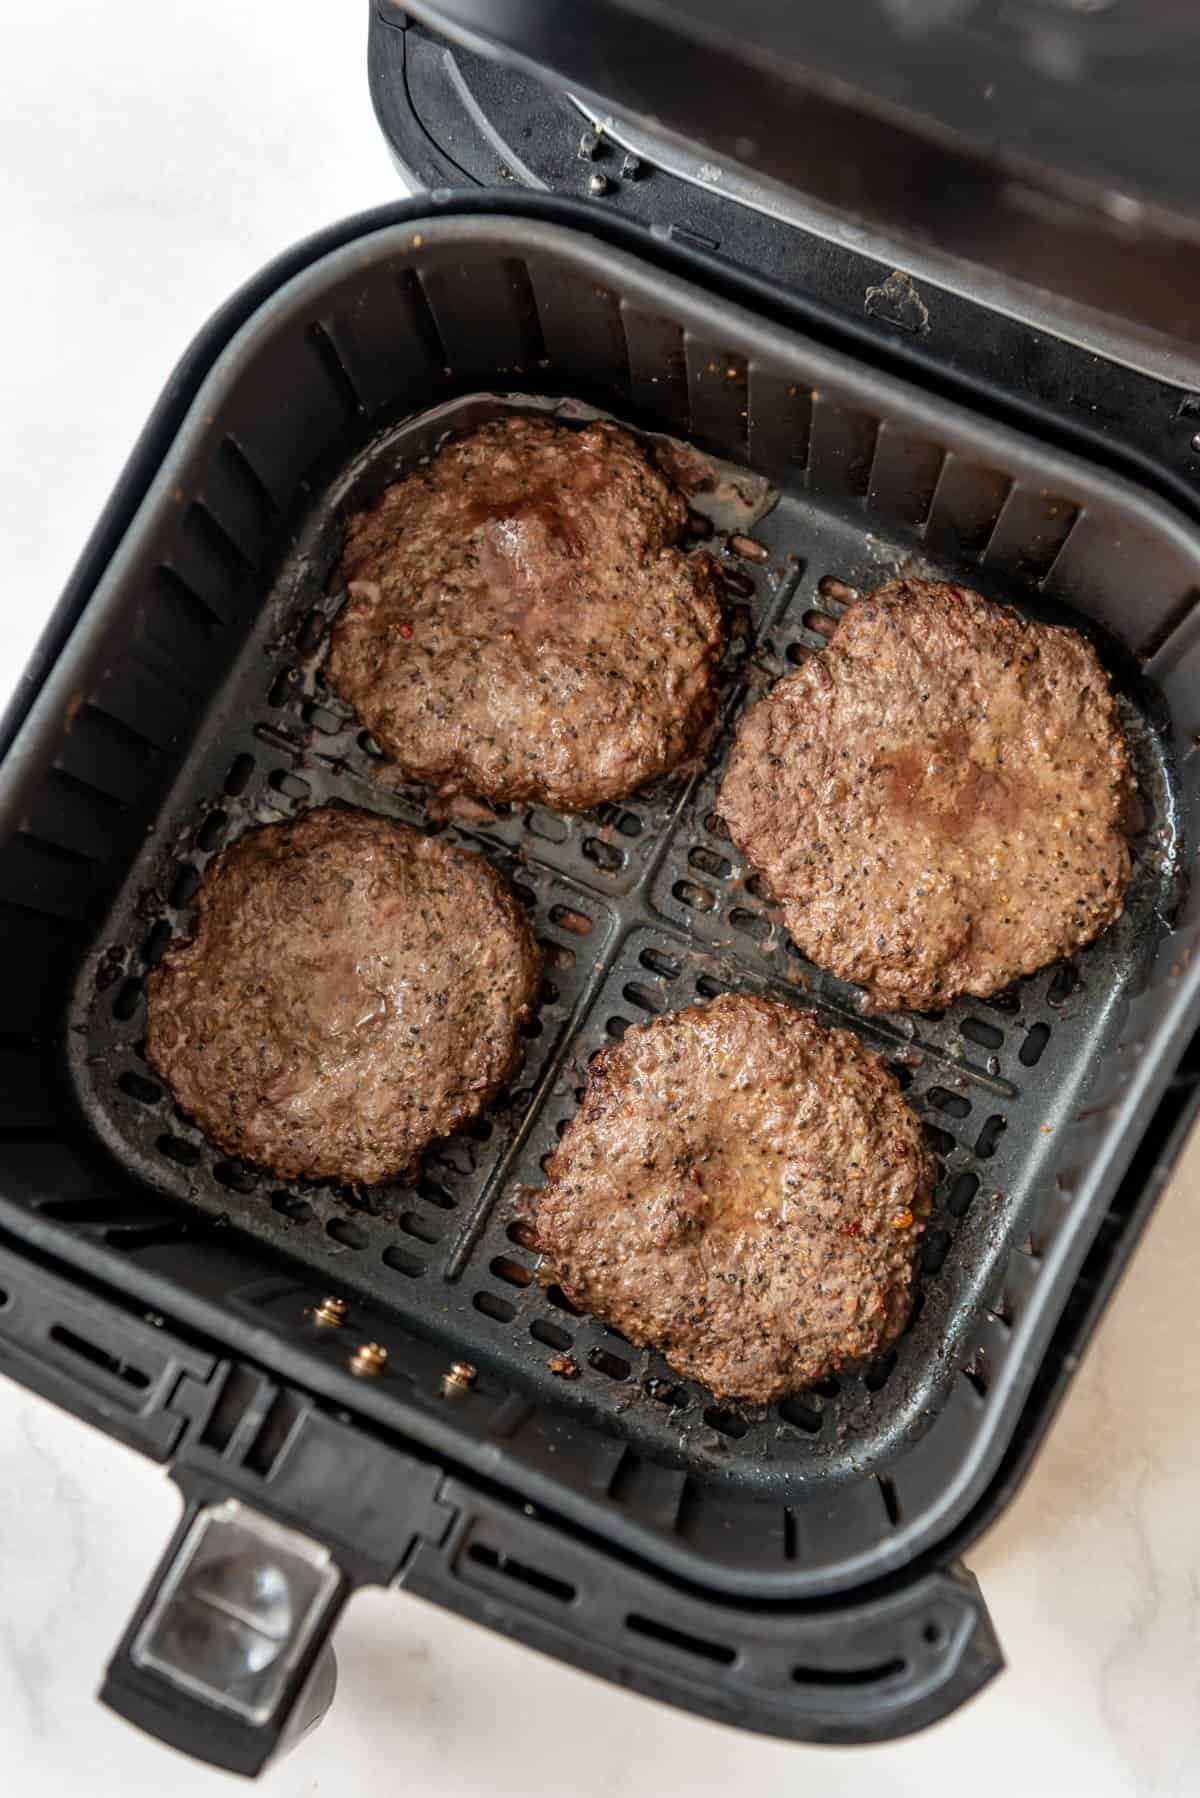 Cooked hamburgers in an air fryer basket.